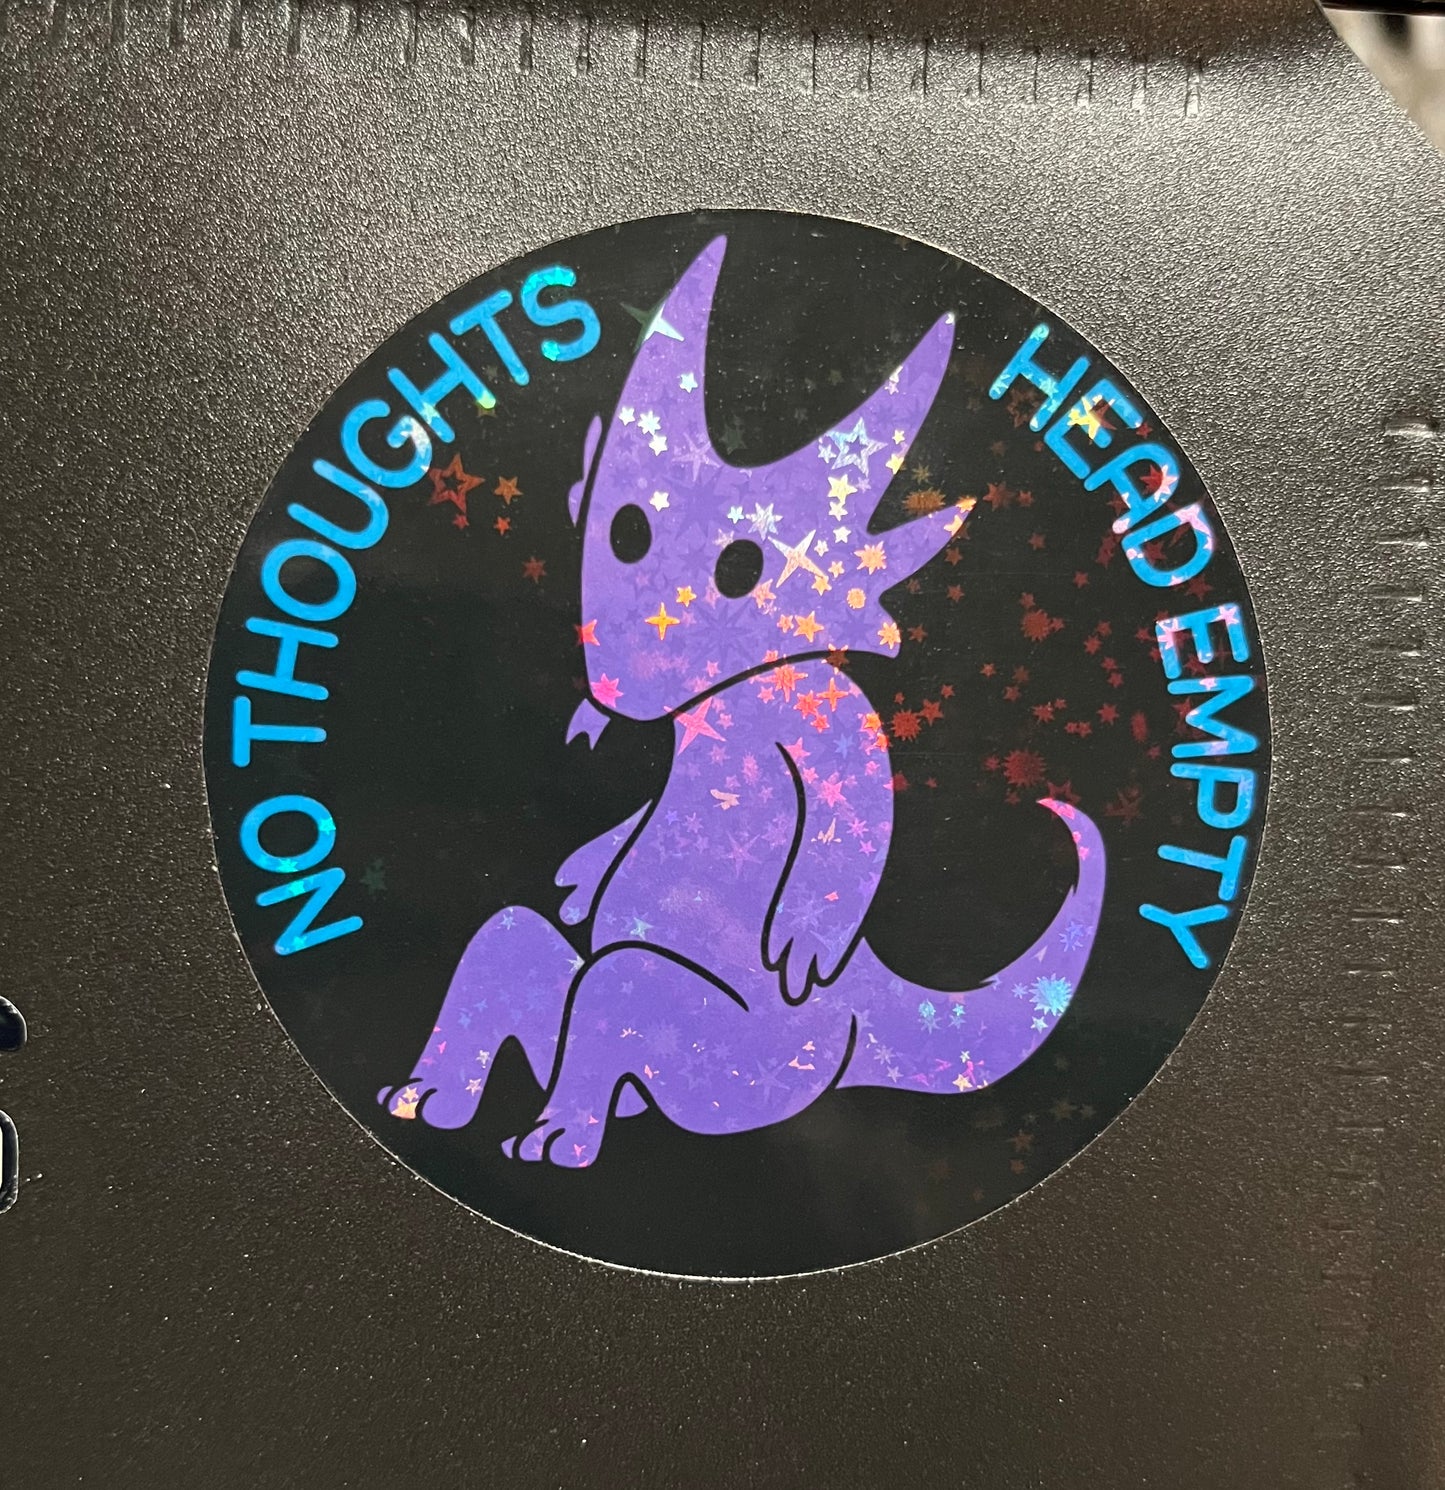 No thoughts, head empty Sticker